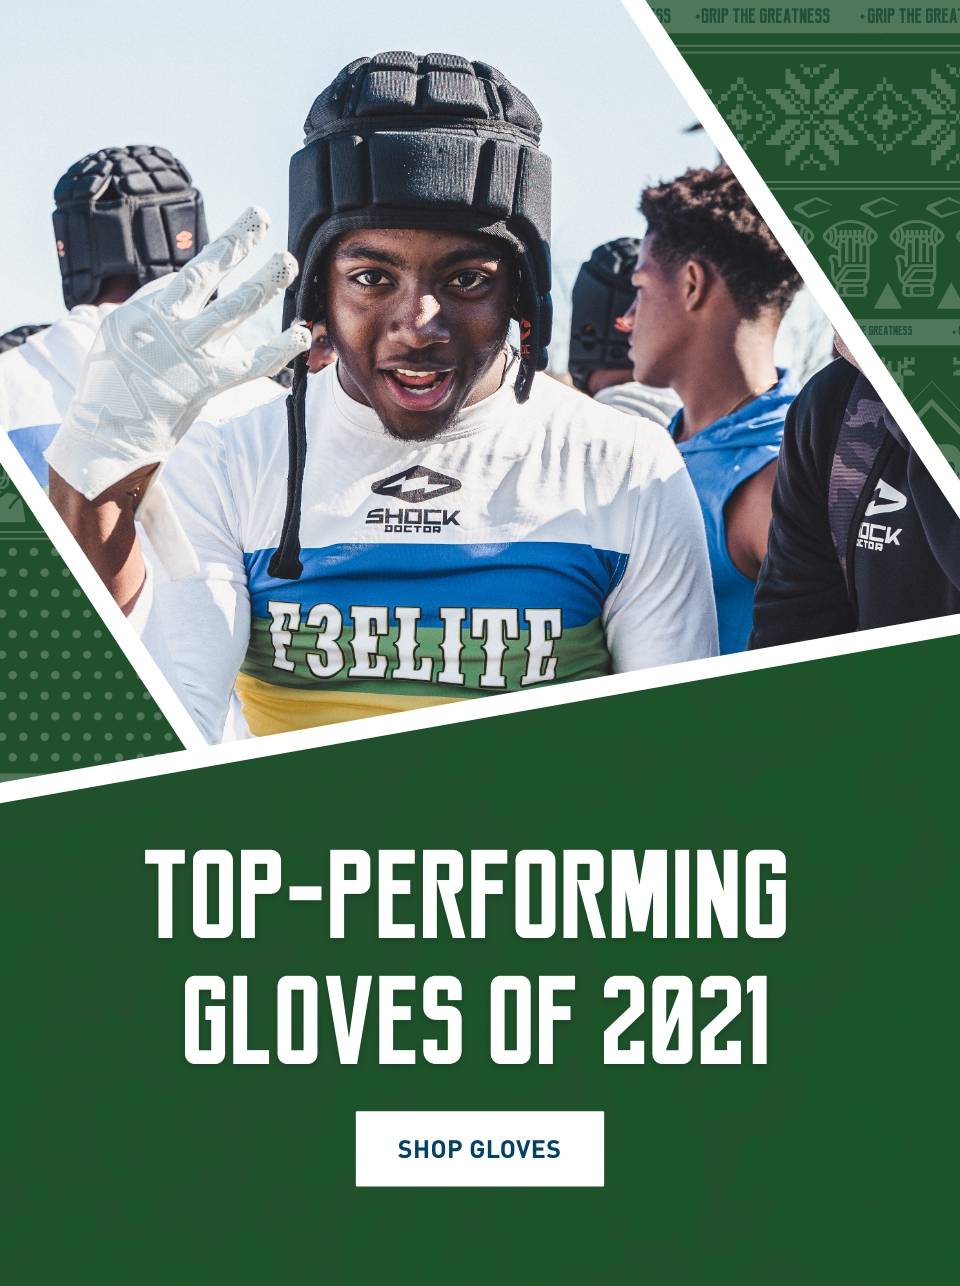 Top-Performing Gloves of 2021